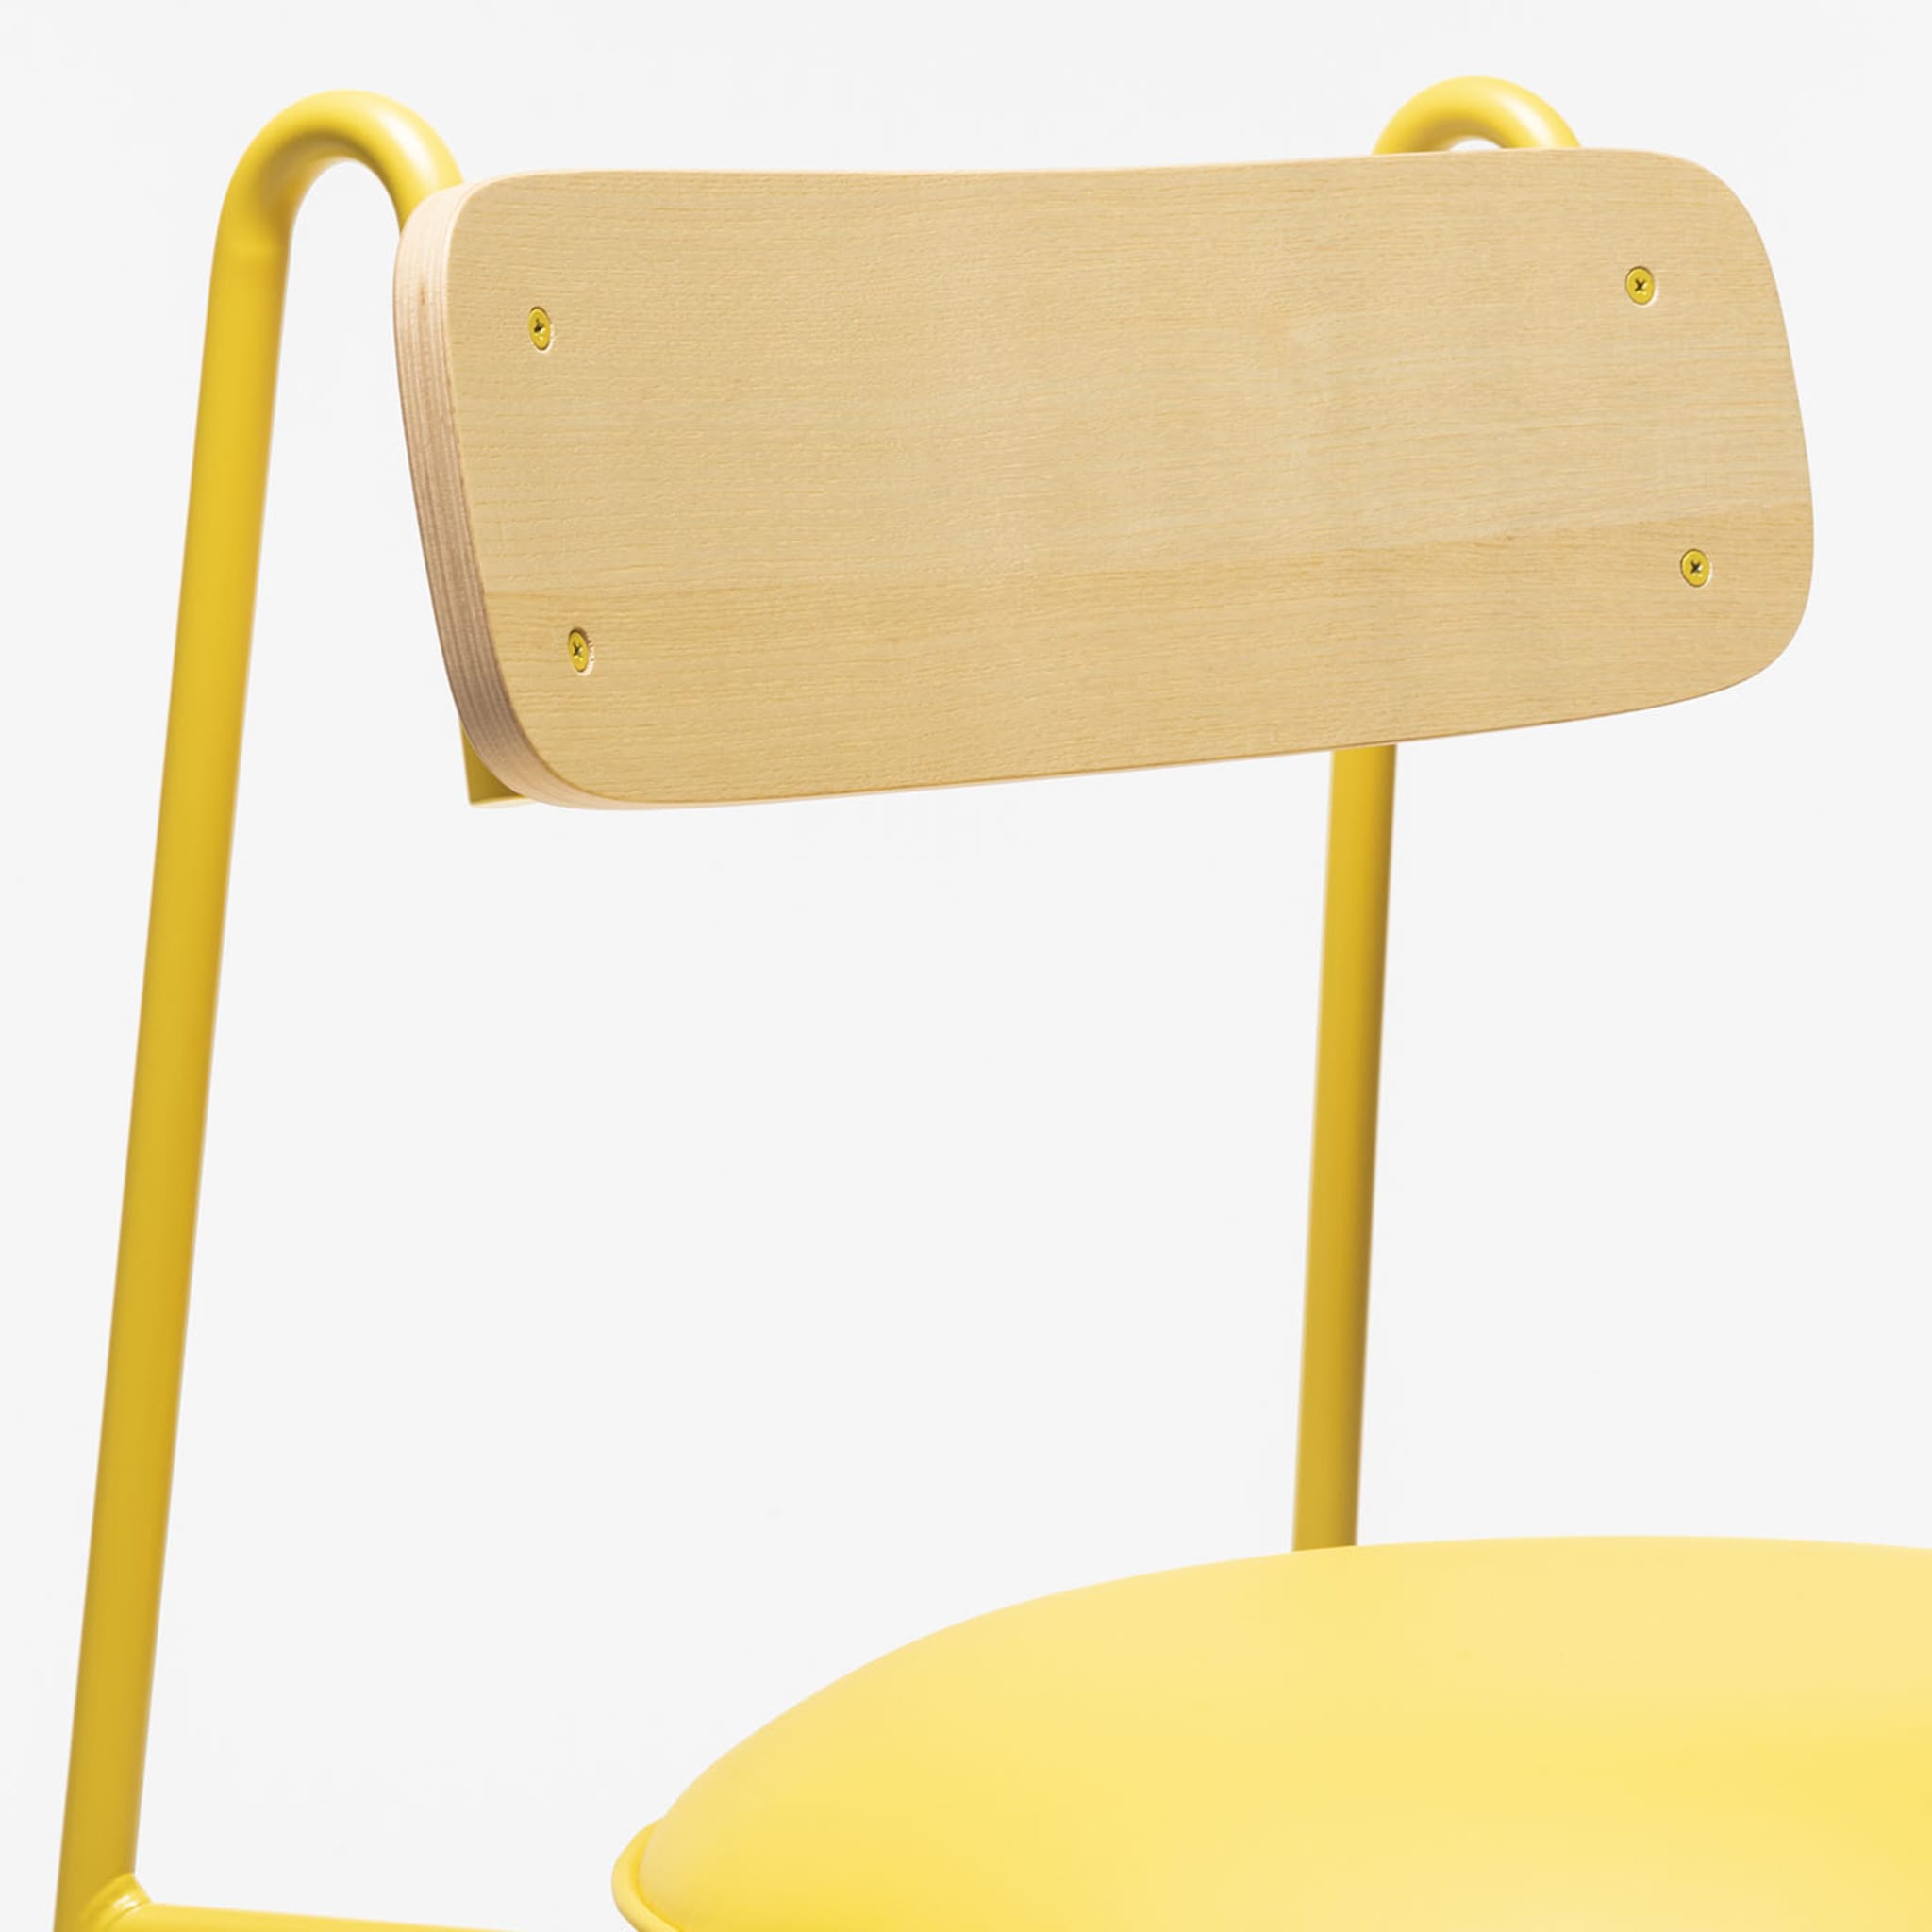 Lena S Yellow And Natural Ash Chair By Designerd - Alternative view 1